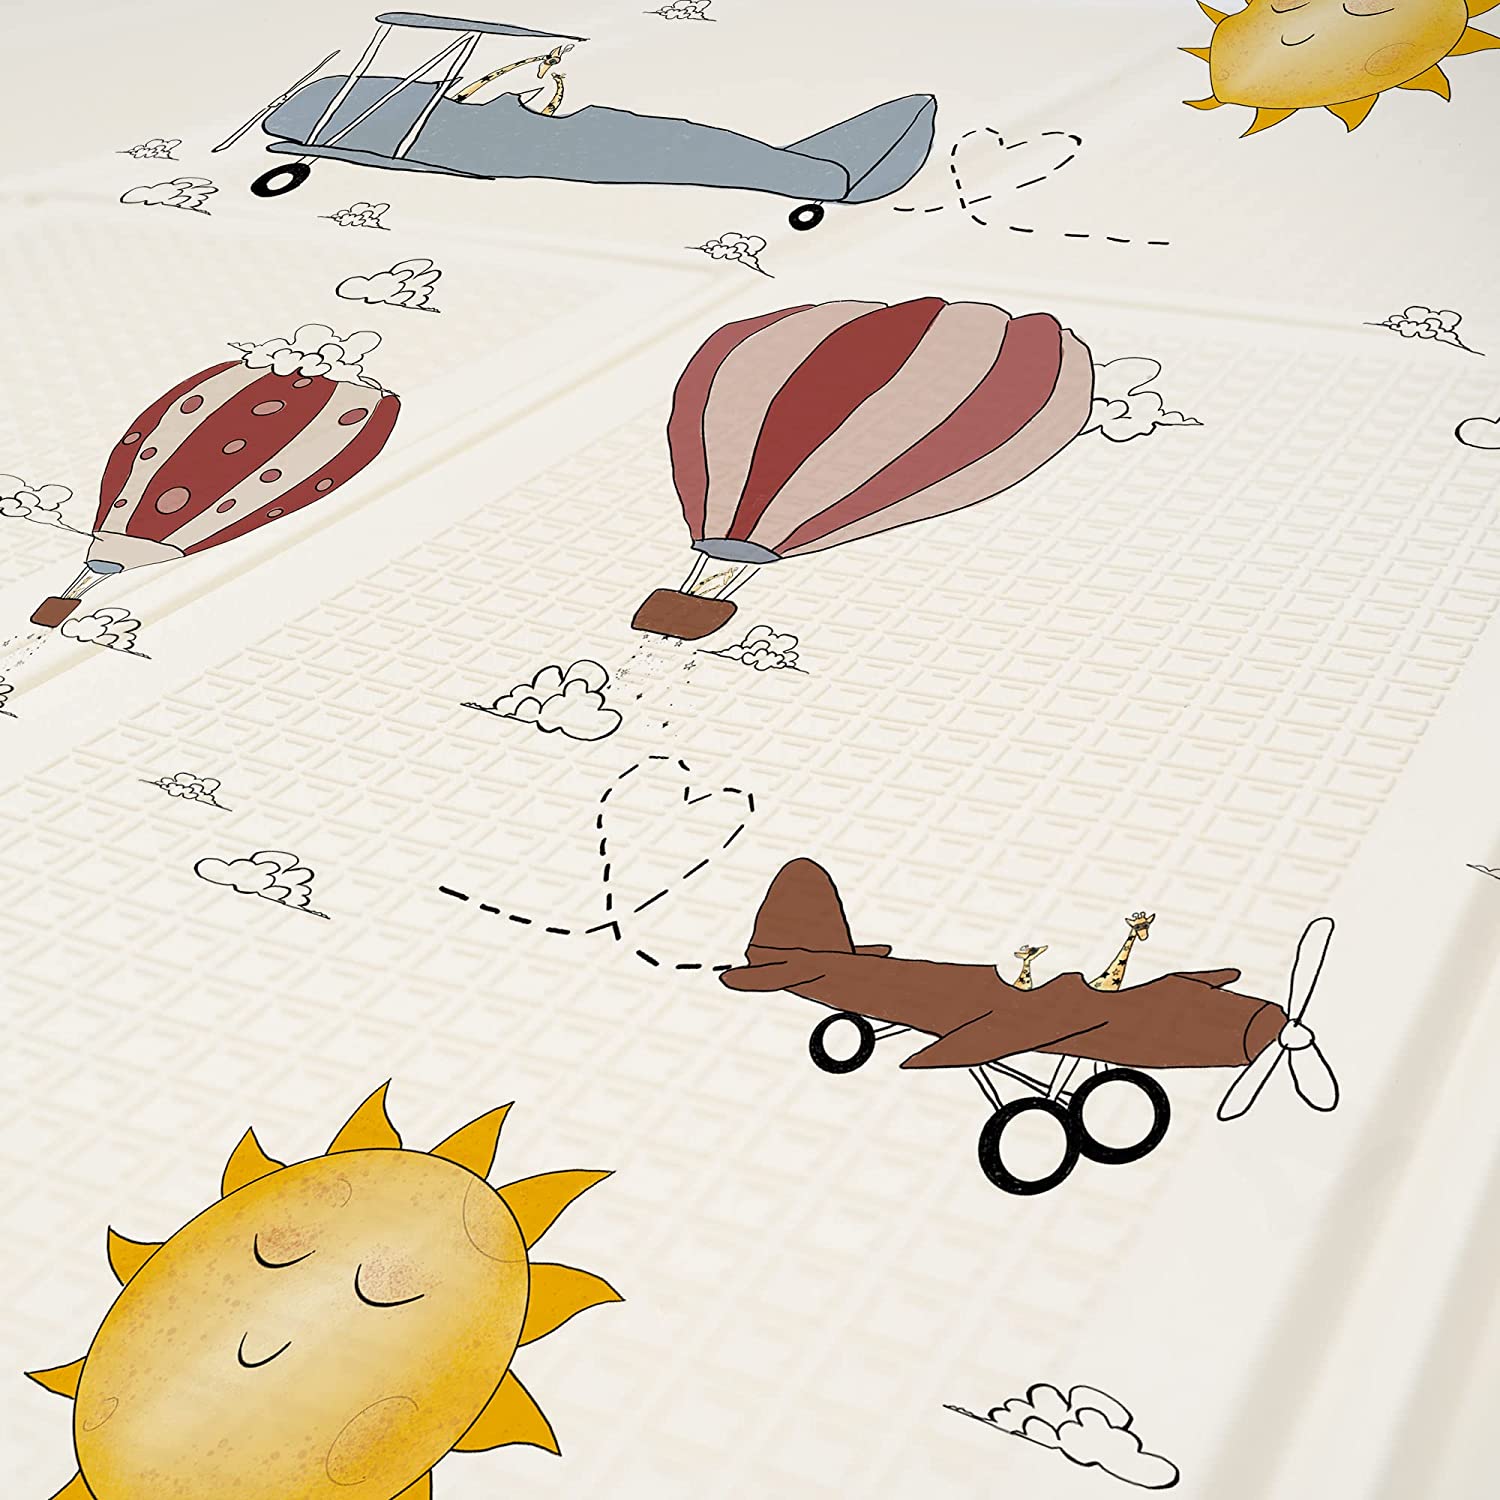 Babies: Planes Play Mat for Fun and Development